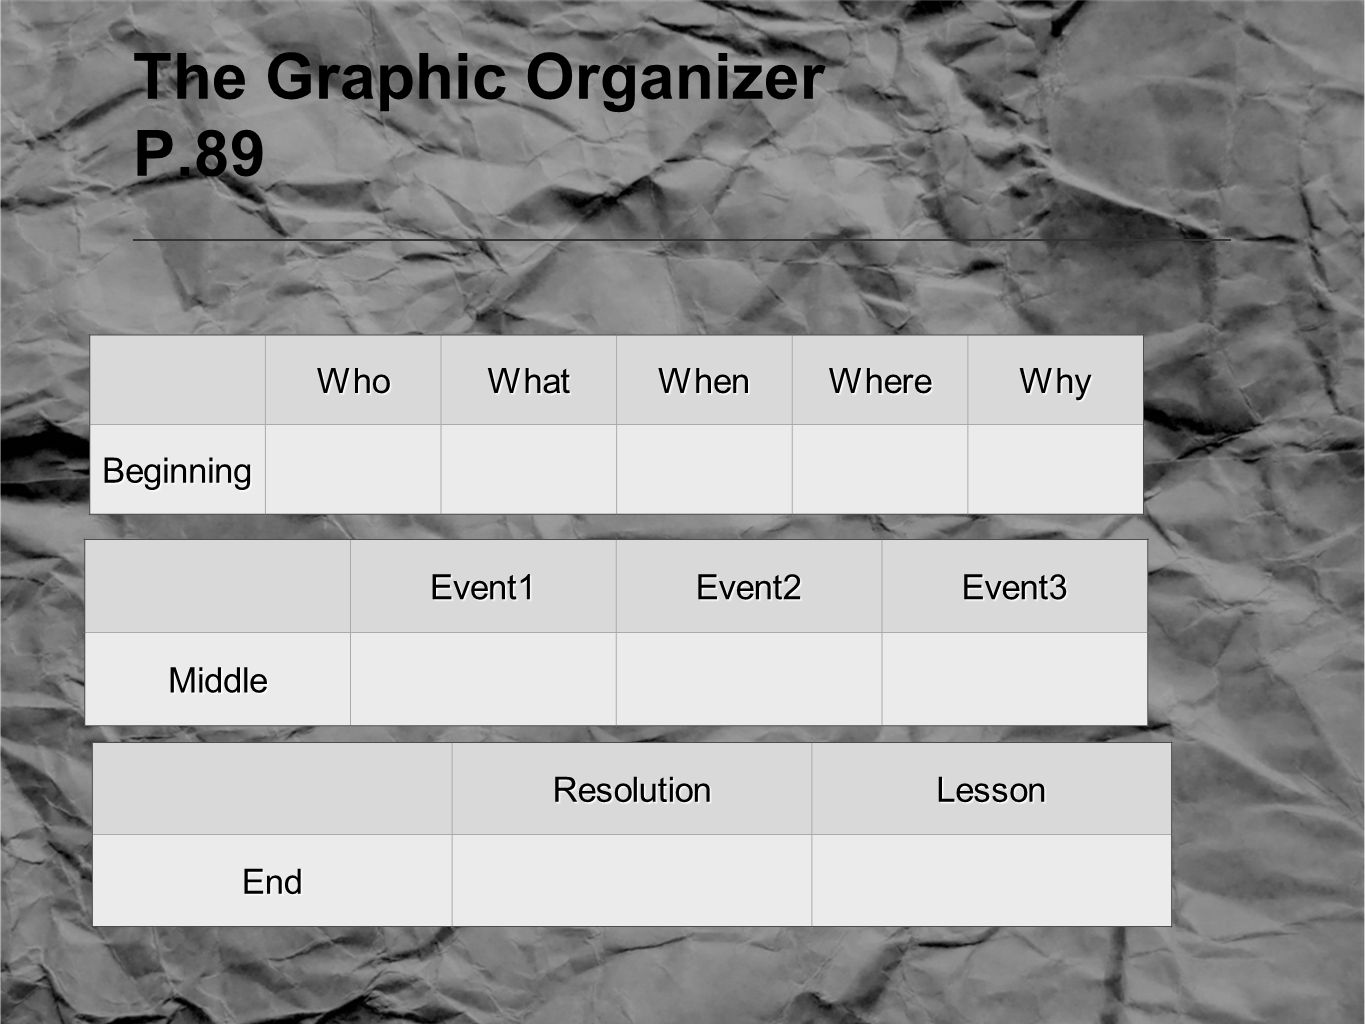 The Graphic Organizer P.89WhoWhatWhenWhereWhyBeginning Event1Event2Event3Middle ResolutionLessonEnd